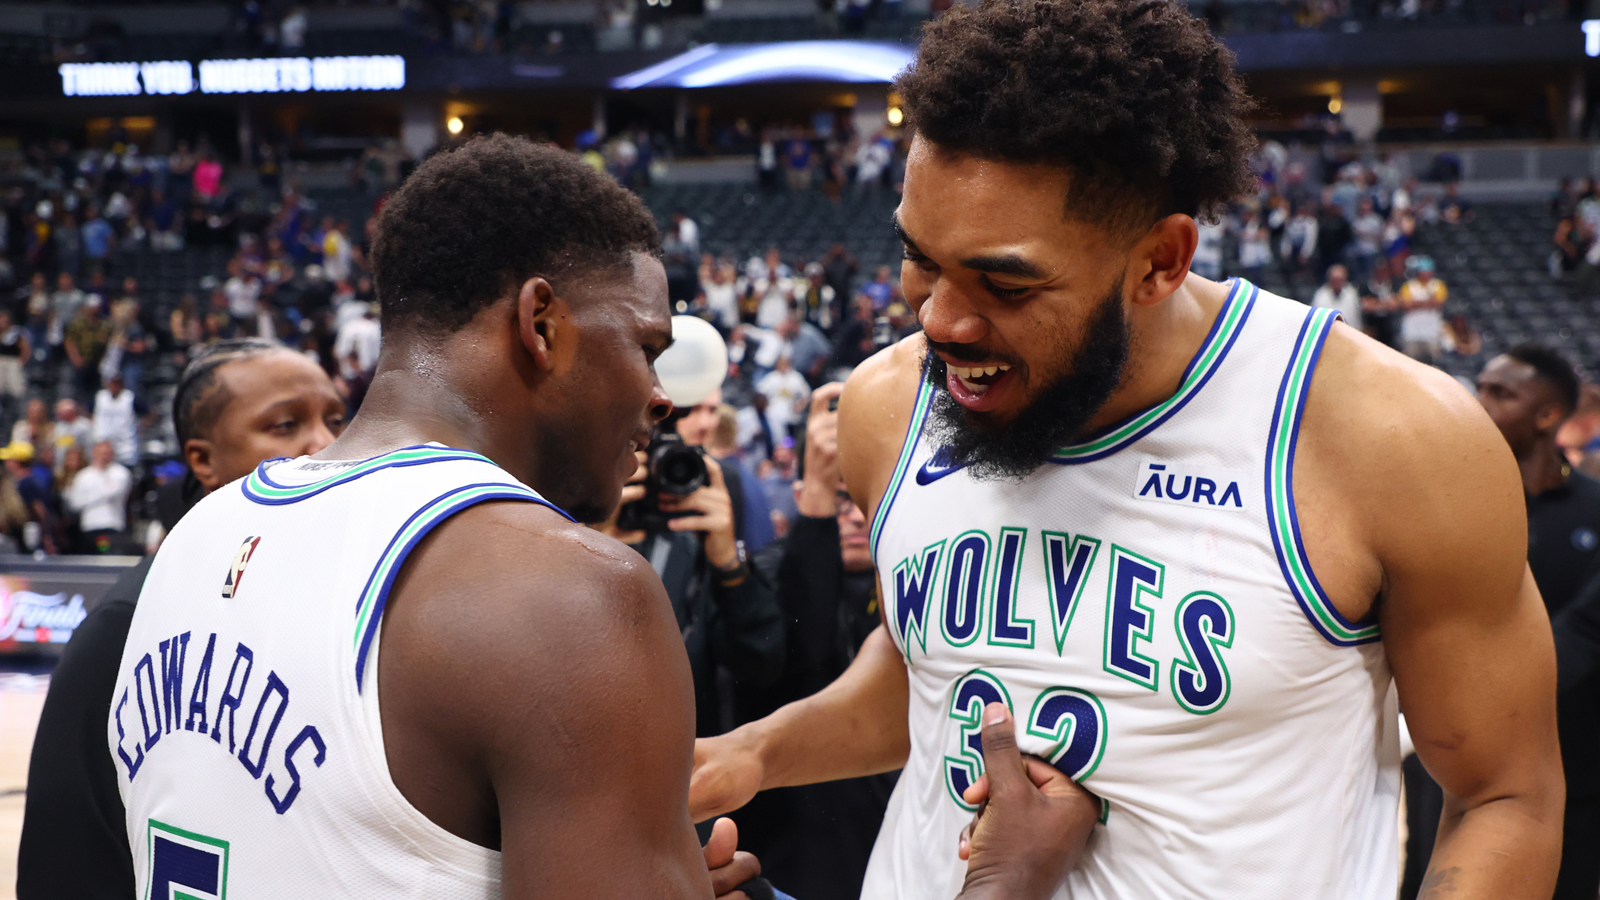 The return of the monster defeats the champion Denver!  The Timberwolves win Game 7 over the Nuggets and now problem Dallas